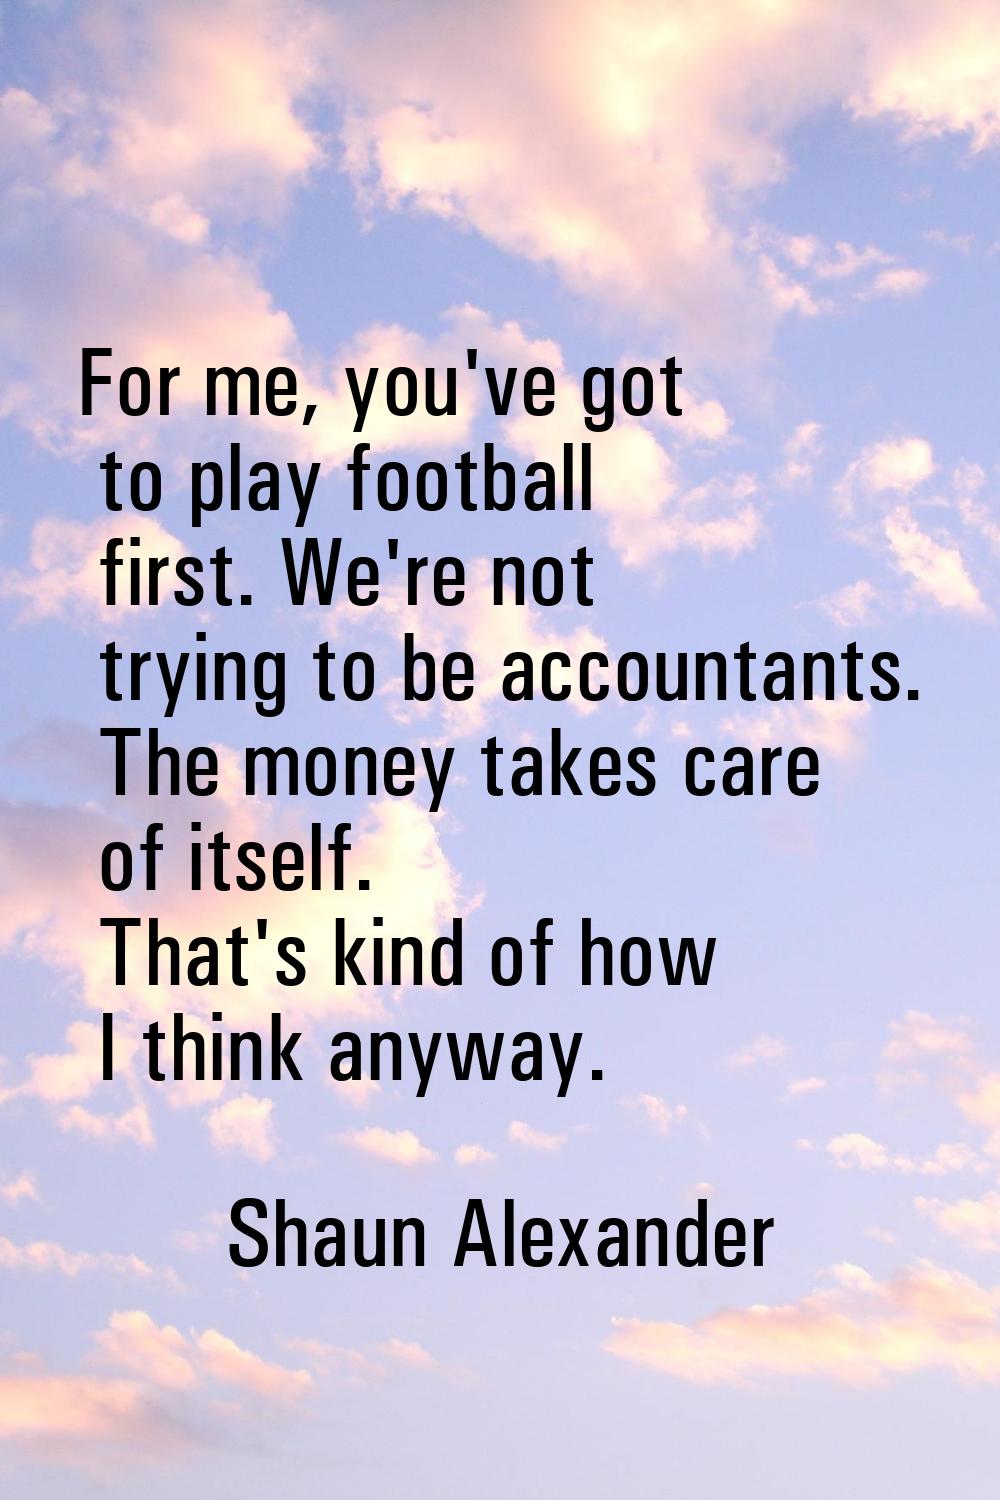 For me, you've got to play football first. We're not trying to be accountants. The money takes care